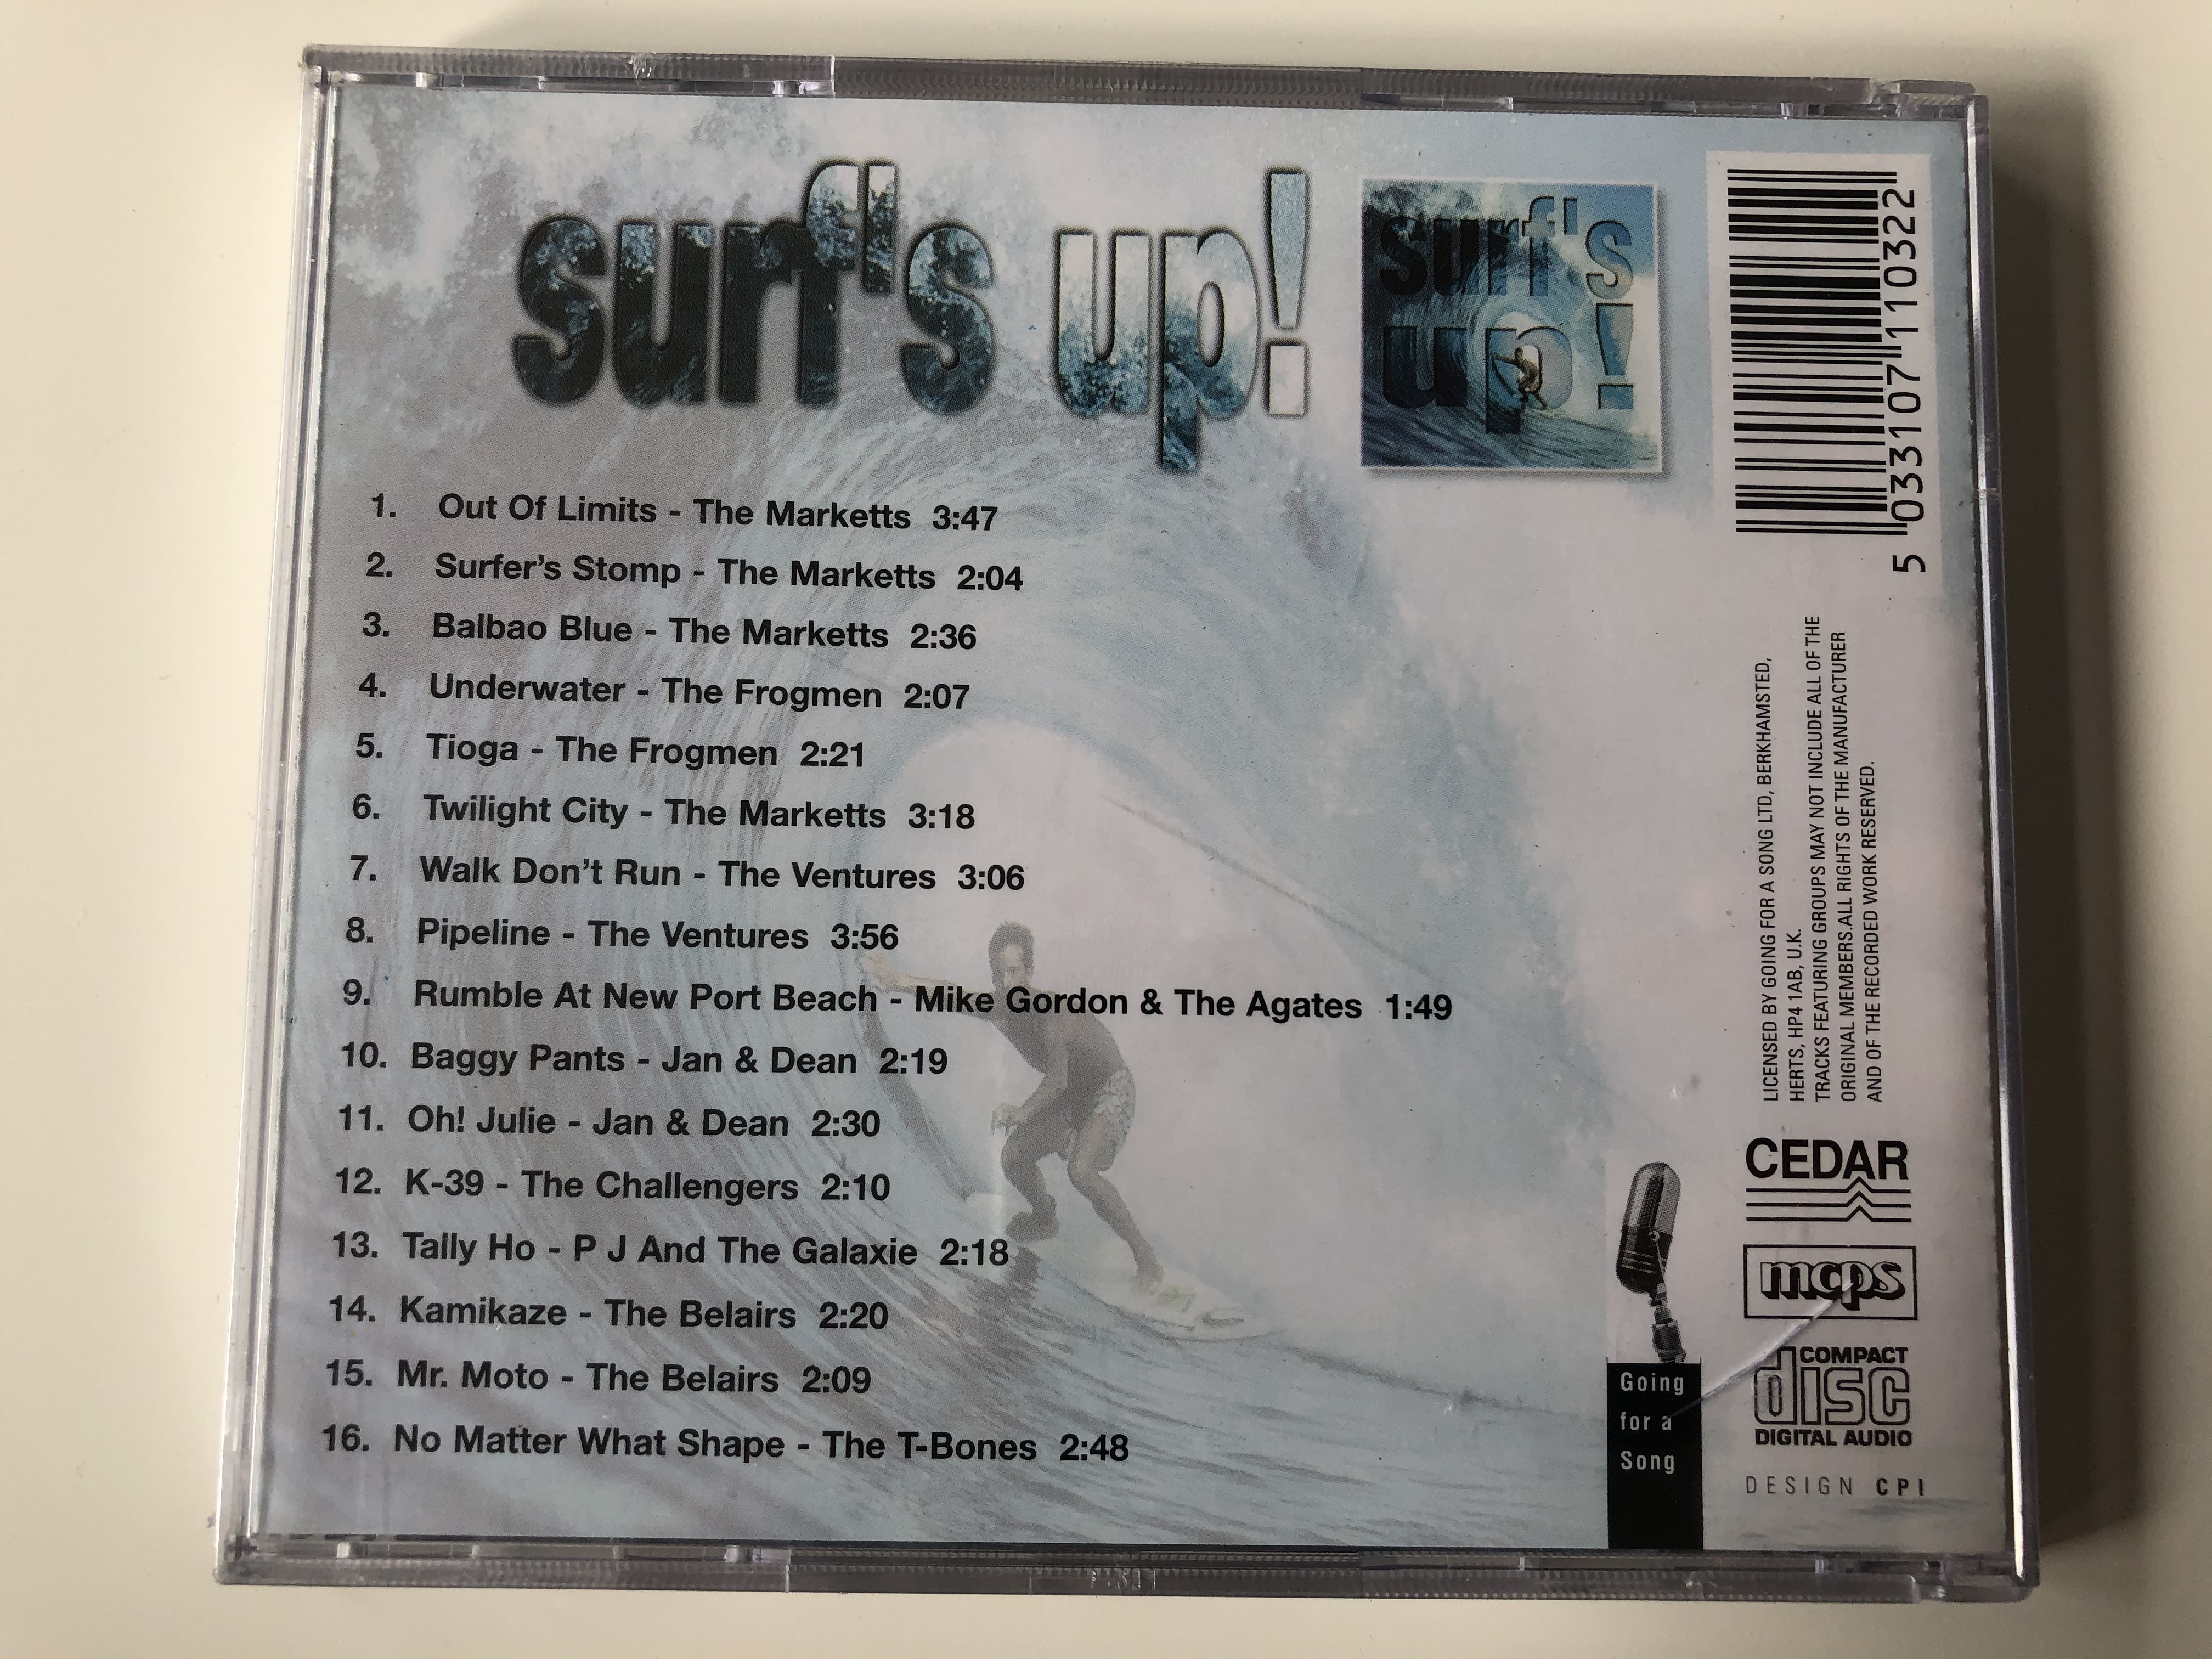 surfs-up-sixteen-super-surfin-sounds-including-out-of-limits-surfer-s-stomp-balbao-blue-pipeline-and-many-more-going-for-a-song-audio-cd-5033107110322-2-.jpg